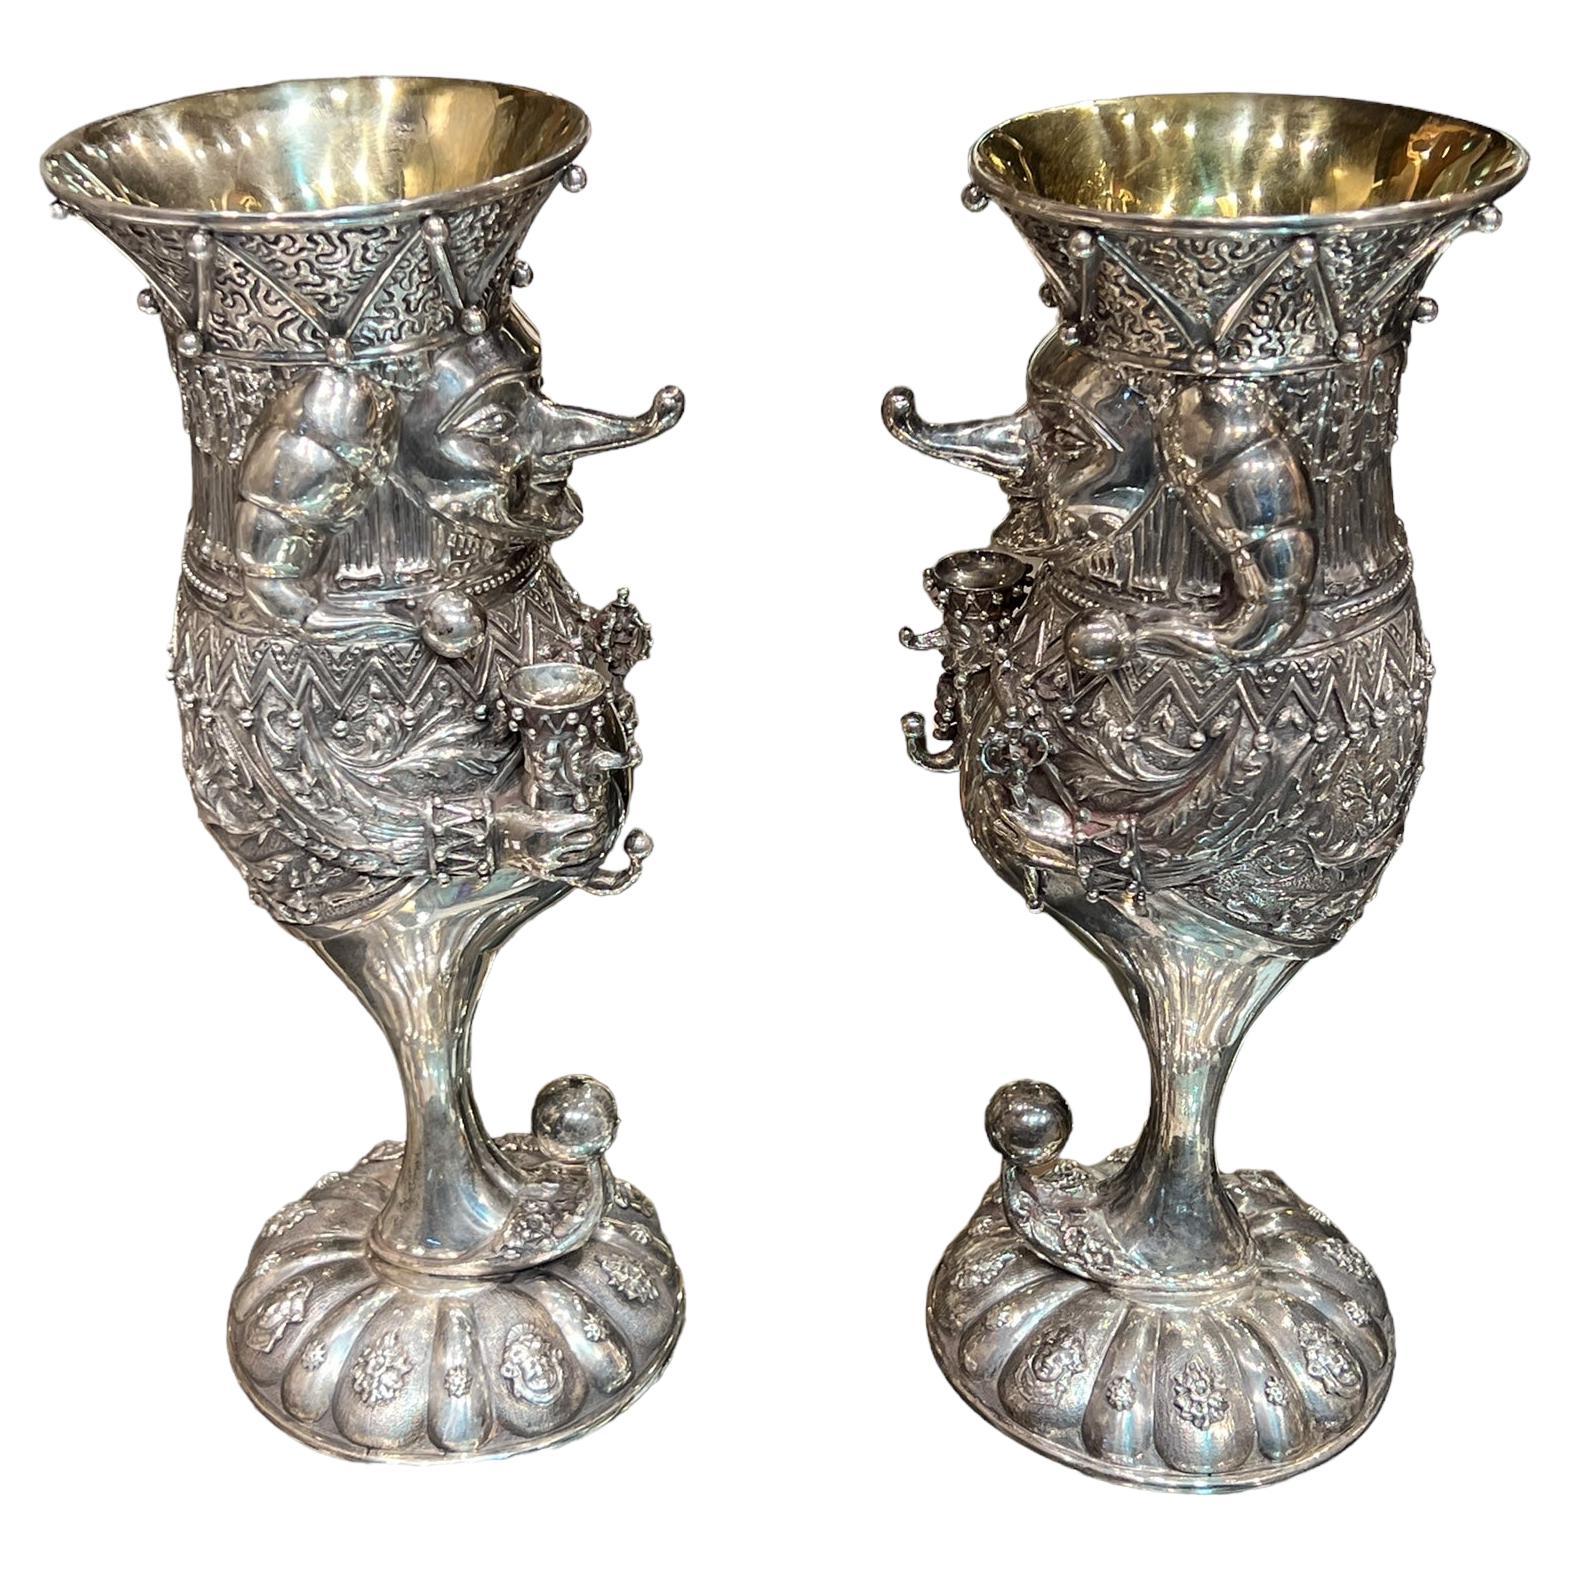 Our sterling silver goblets in the form of the clown, Petrushka, by the Russian artist, Mihail Chemiakin (1943- ) each measure 10 1/2 in (26.7 cm) by 4 in (10.1 cm) and are in excellent condition, polished with tarnish in crevices.  Each signed on